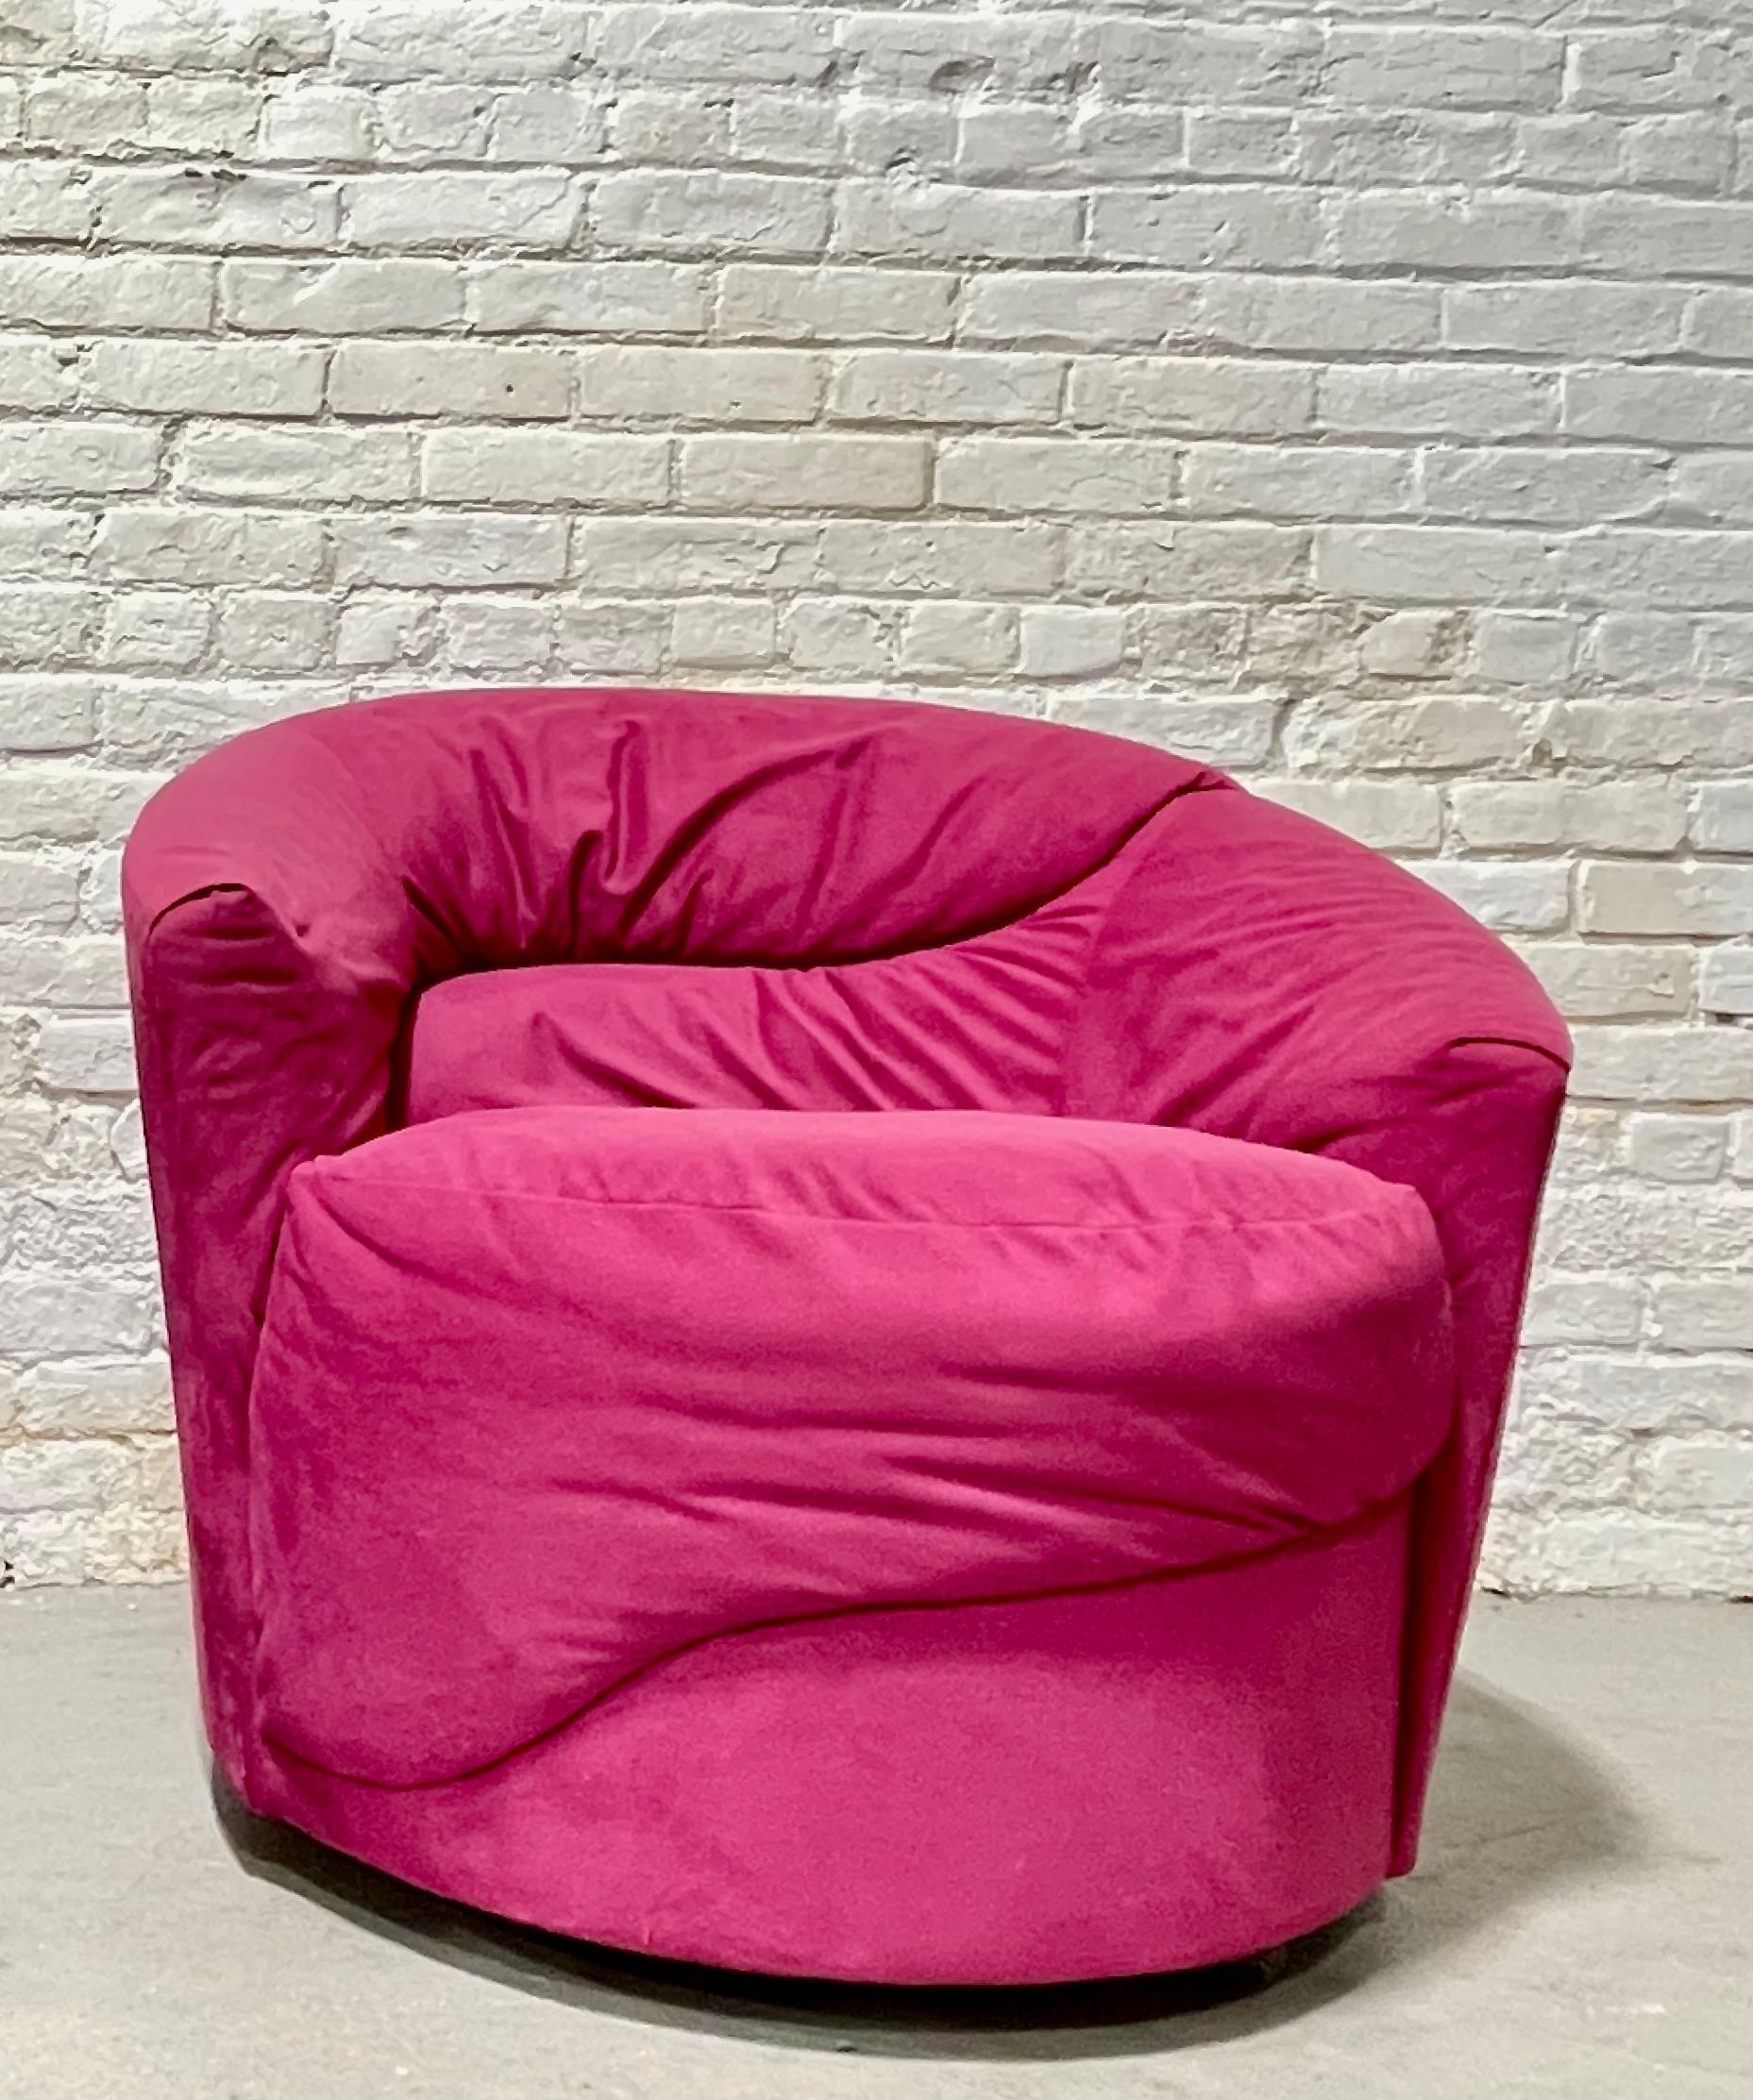 Postmodern / Mid-Century Modern Swivel Lounge Chair / club chair / armchair in the style of Vladimir Kagan. Super sexy pink upholstery. Extremely comfortable chair with plush cushioning. Very nice condition with some light wear from age and use - no